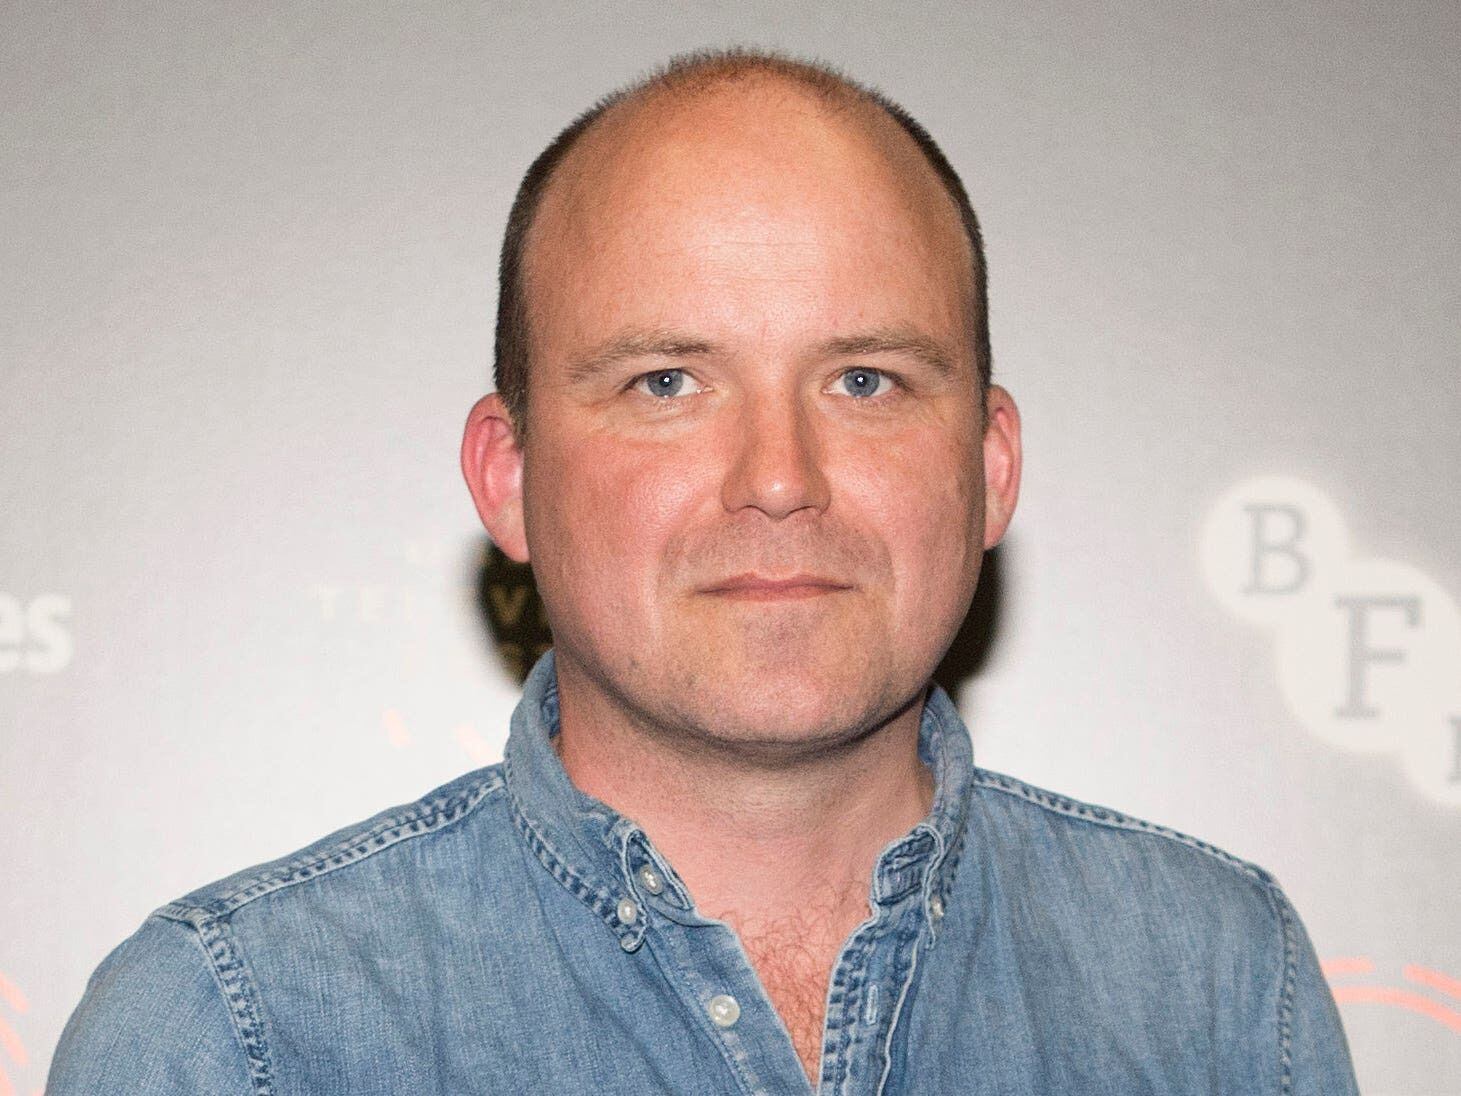 Rory Kinnear says safety on set should have changed since father’s death